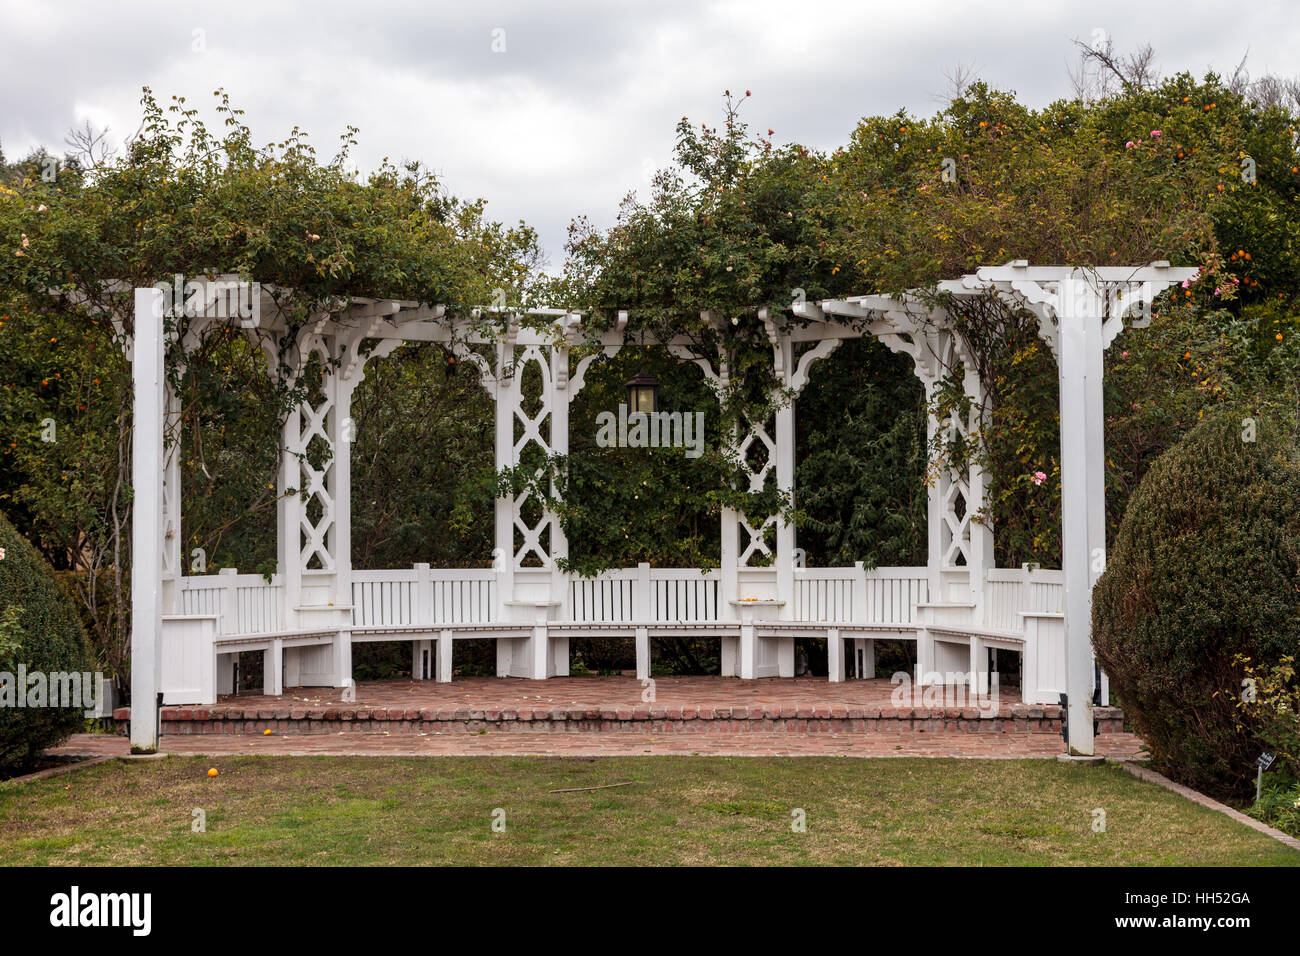 Los Angeles, CA, USA – January 15, 2017: White porch gazebo with lights in a rose garden at the Los Angeles Arboretum in Souther Stock Photo